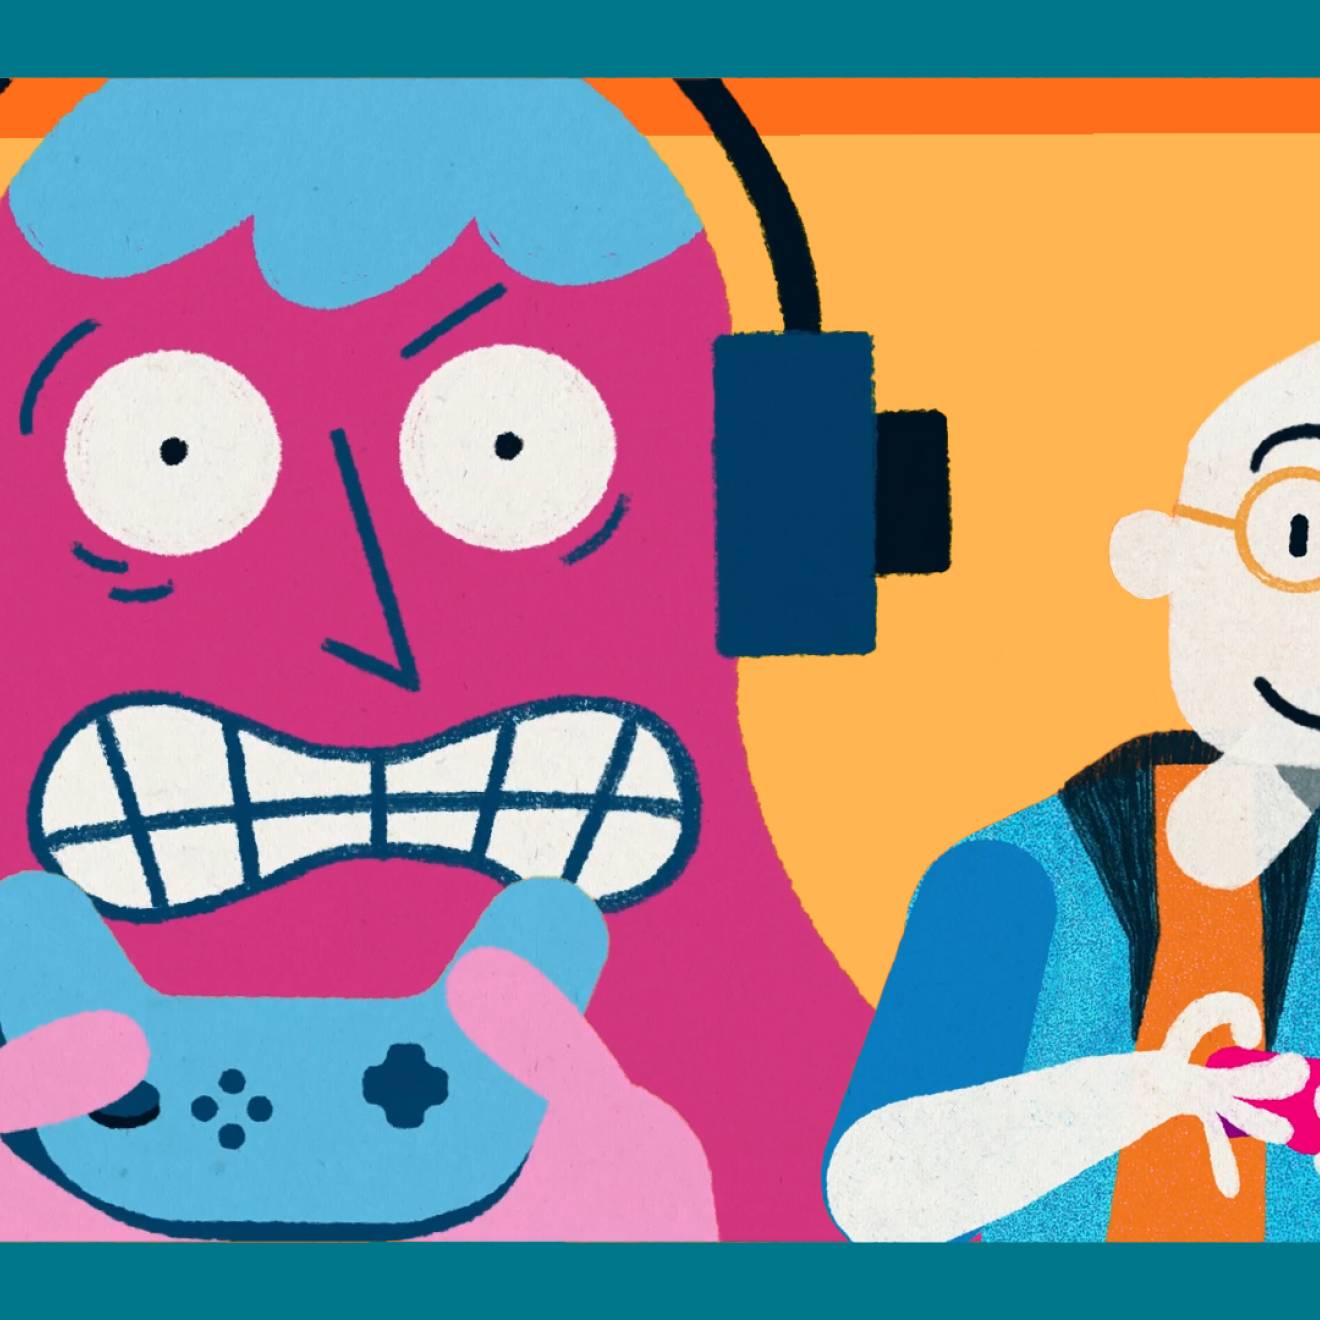 Illustration of two people playing video games. One is stressed out, the other looks relaxed.